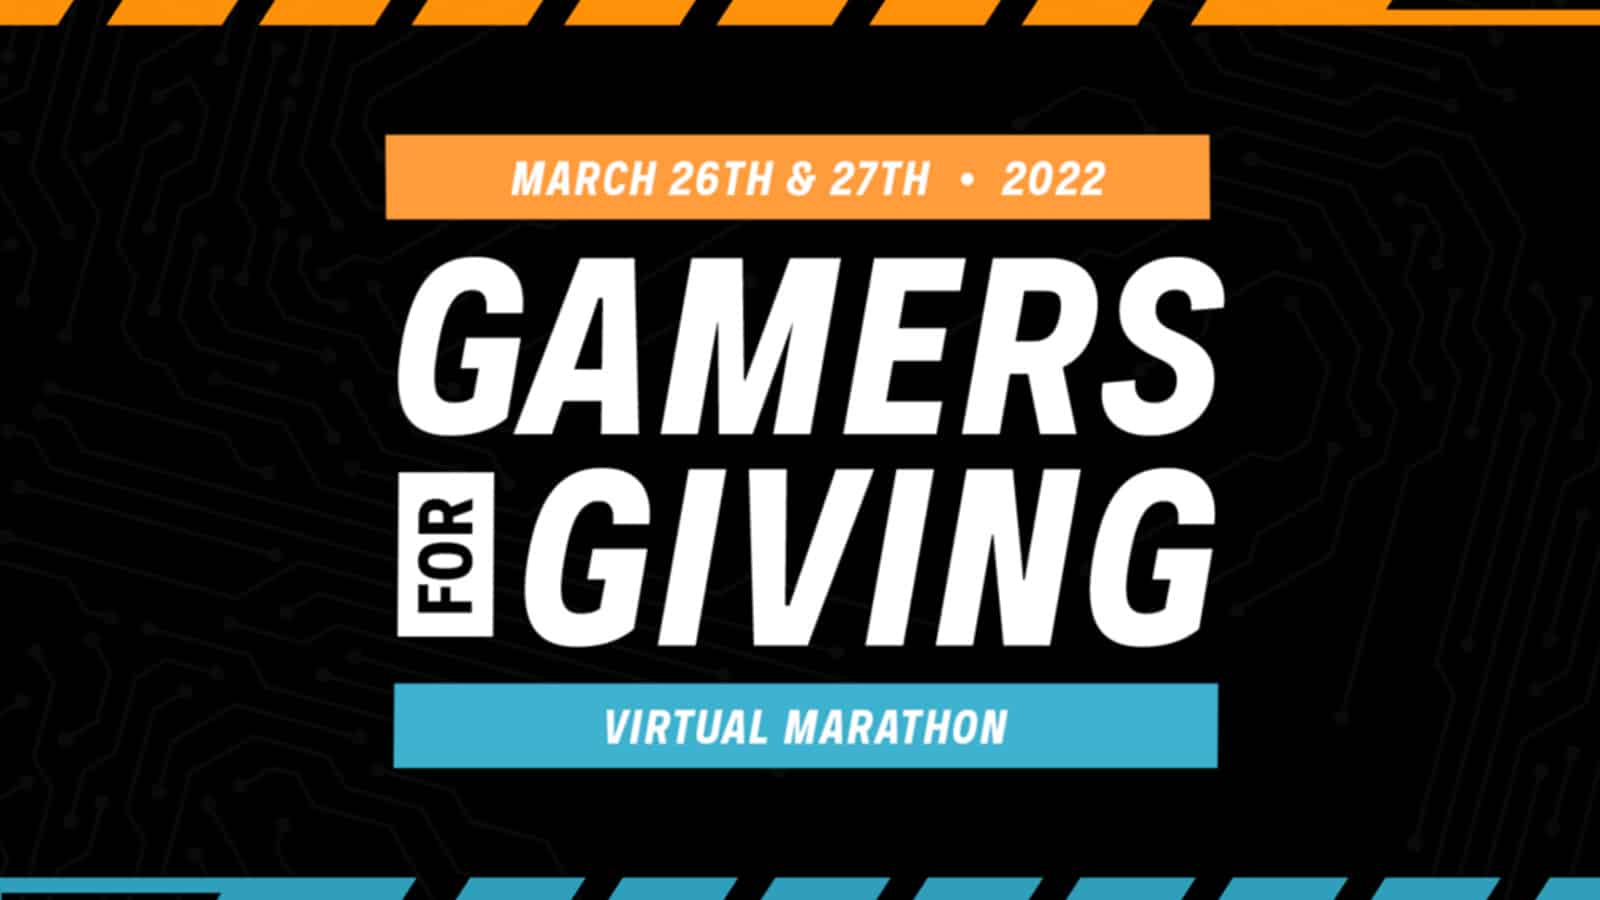 Gamers For GIving event Gamers Outreach